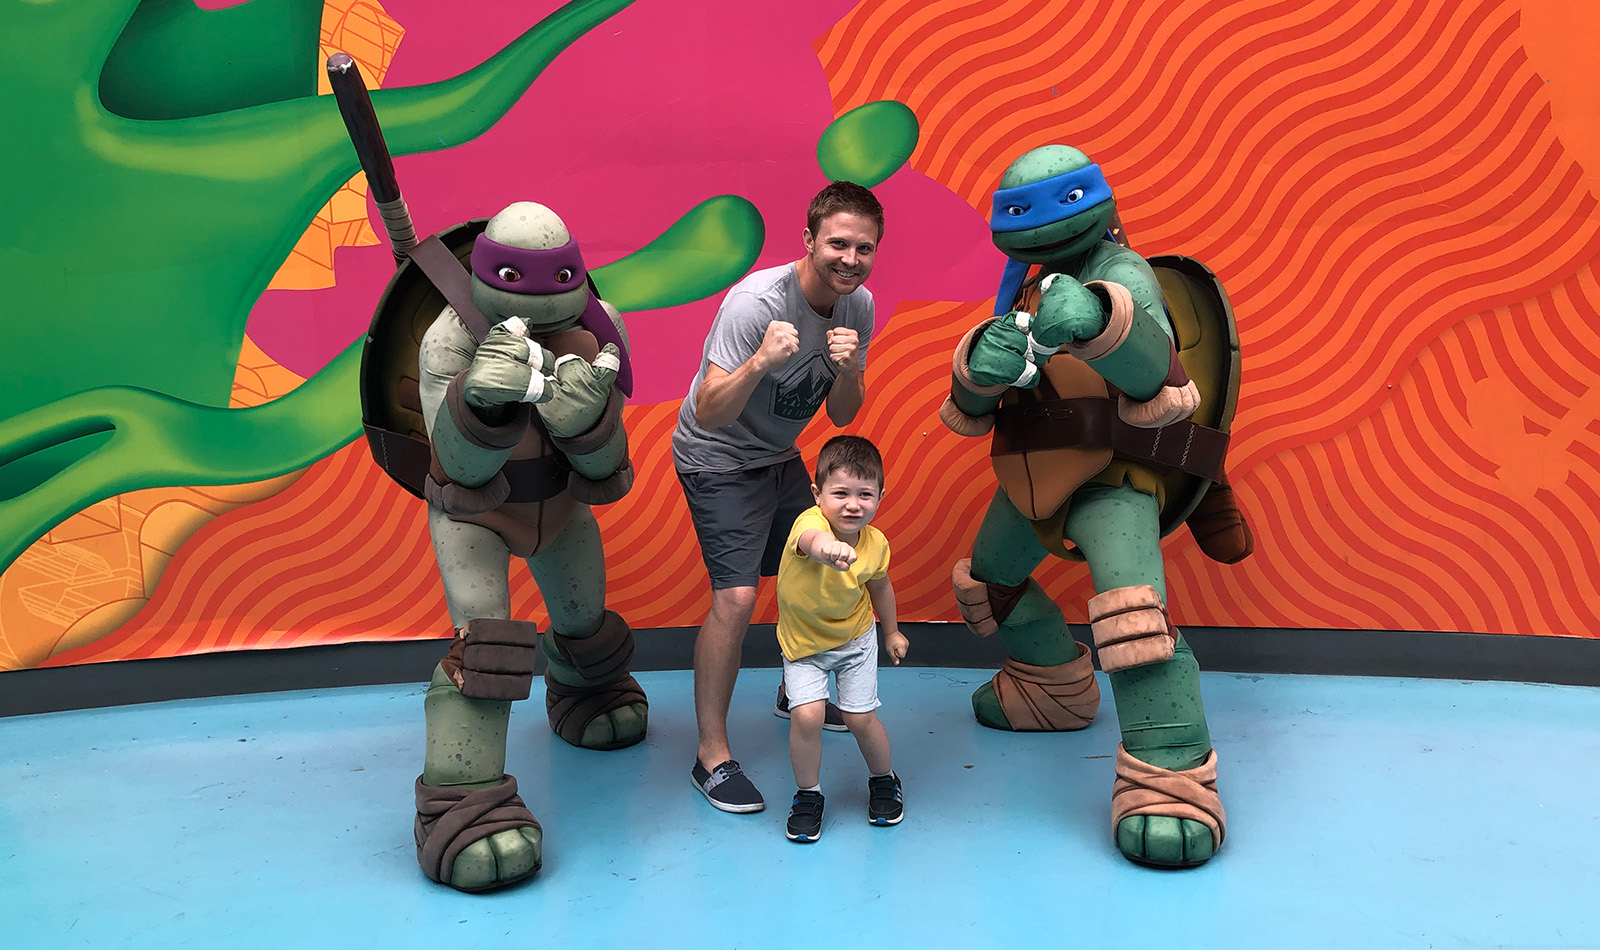 Kyle with his son standing with the ninja turtles